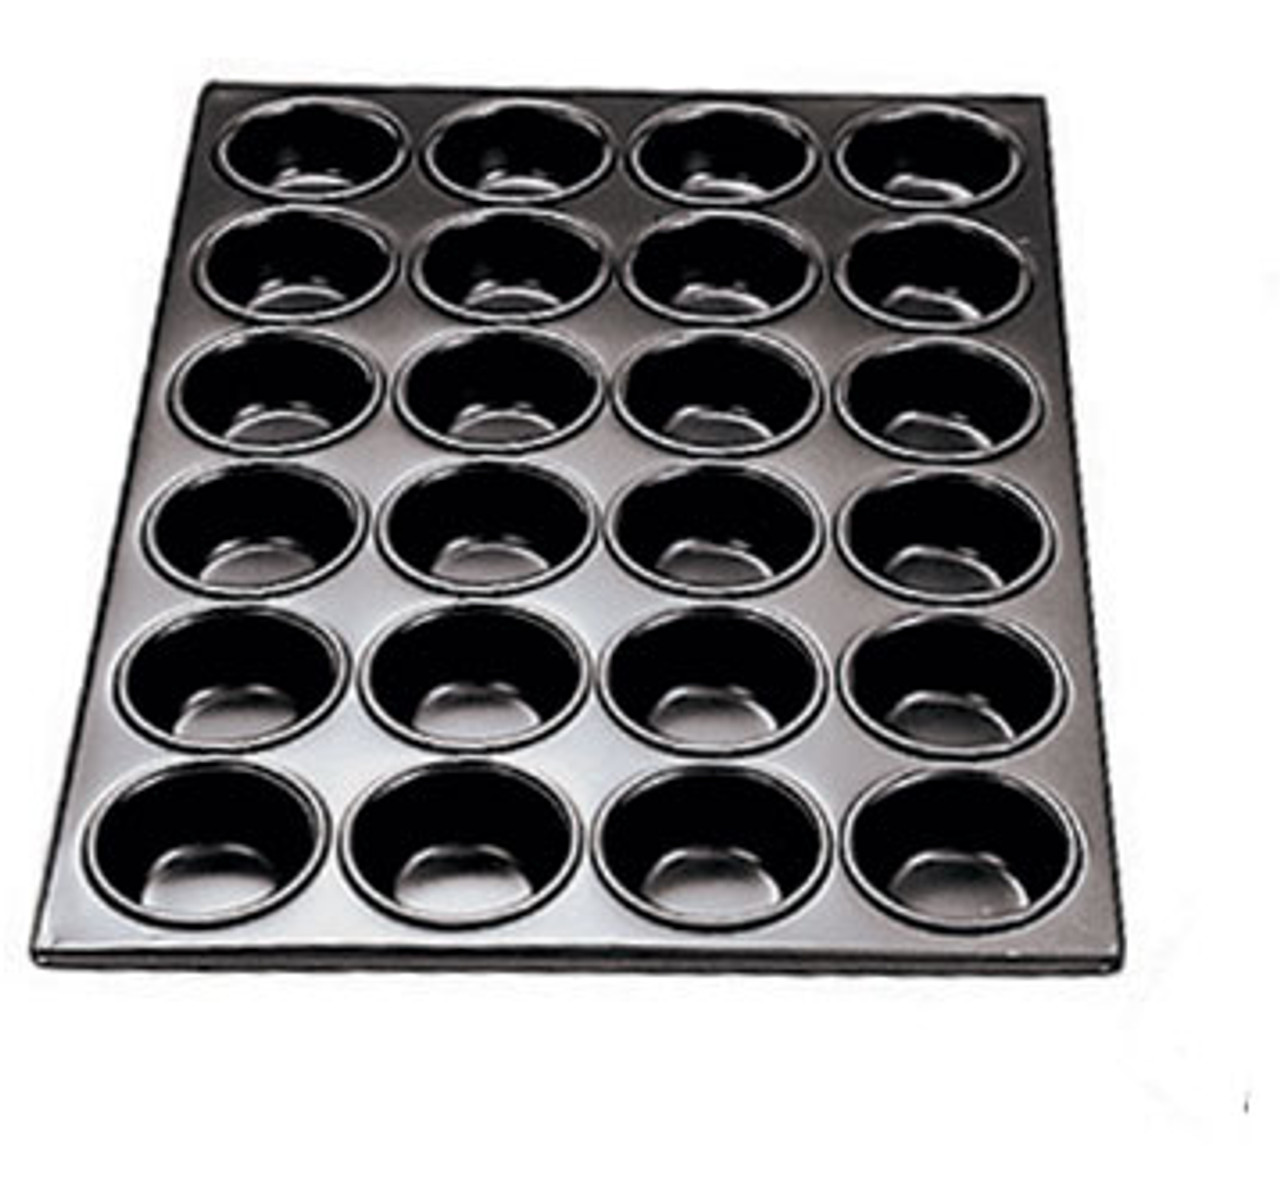 Thunder Group Slkmp024 Non-Stick Muffin Pan With 24 Regular Cups